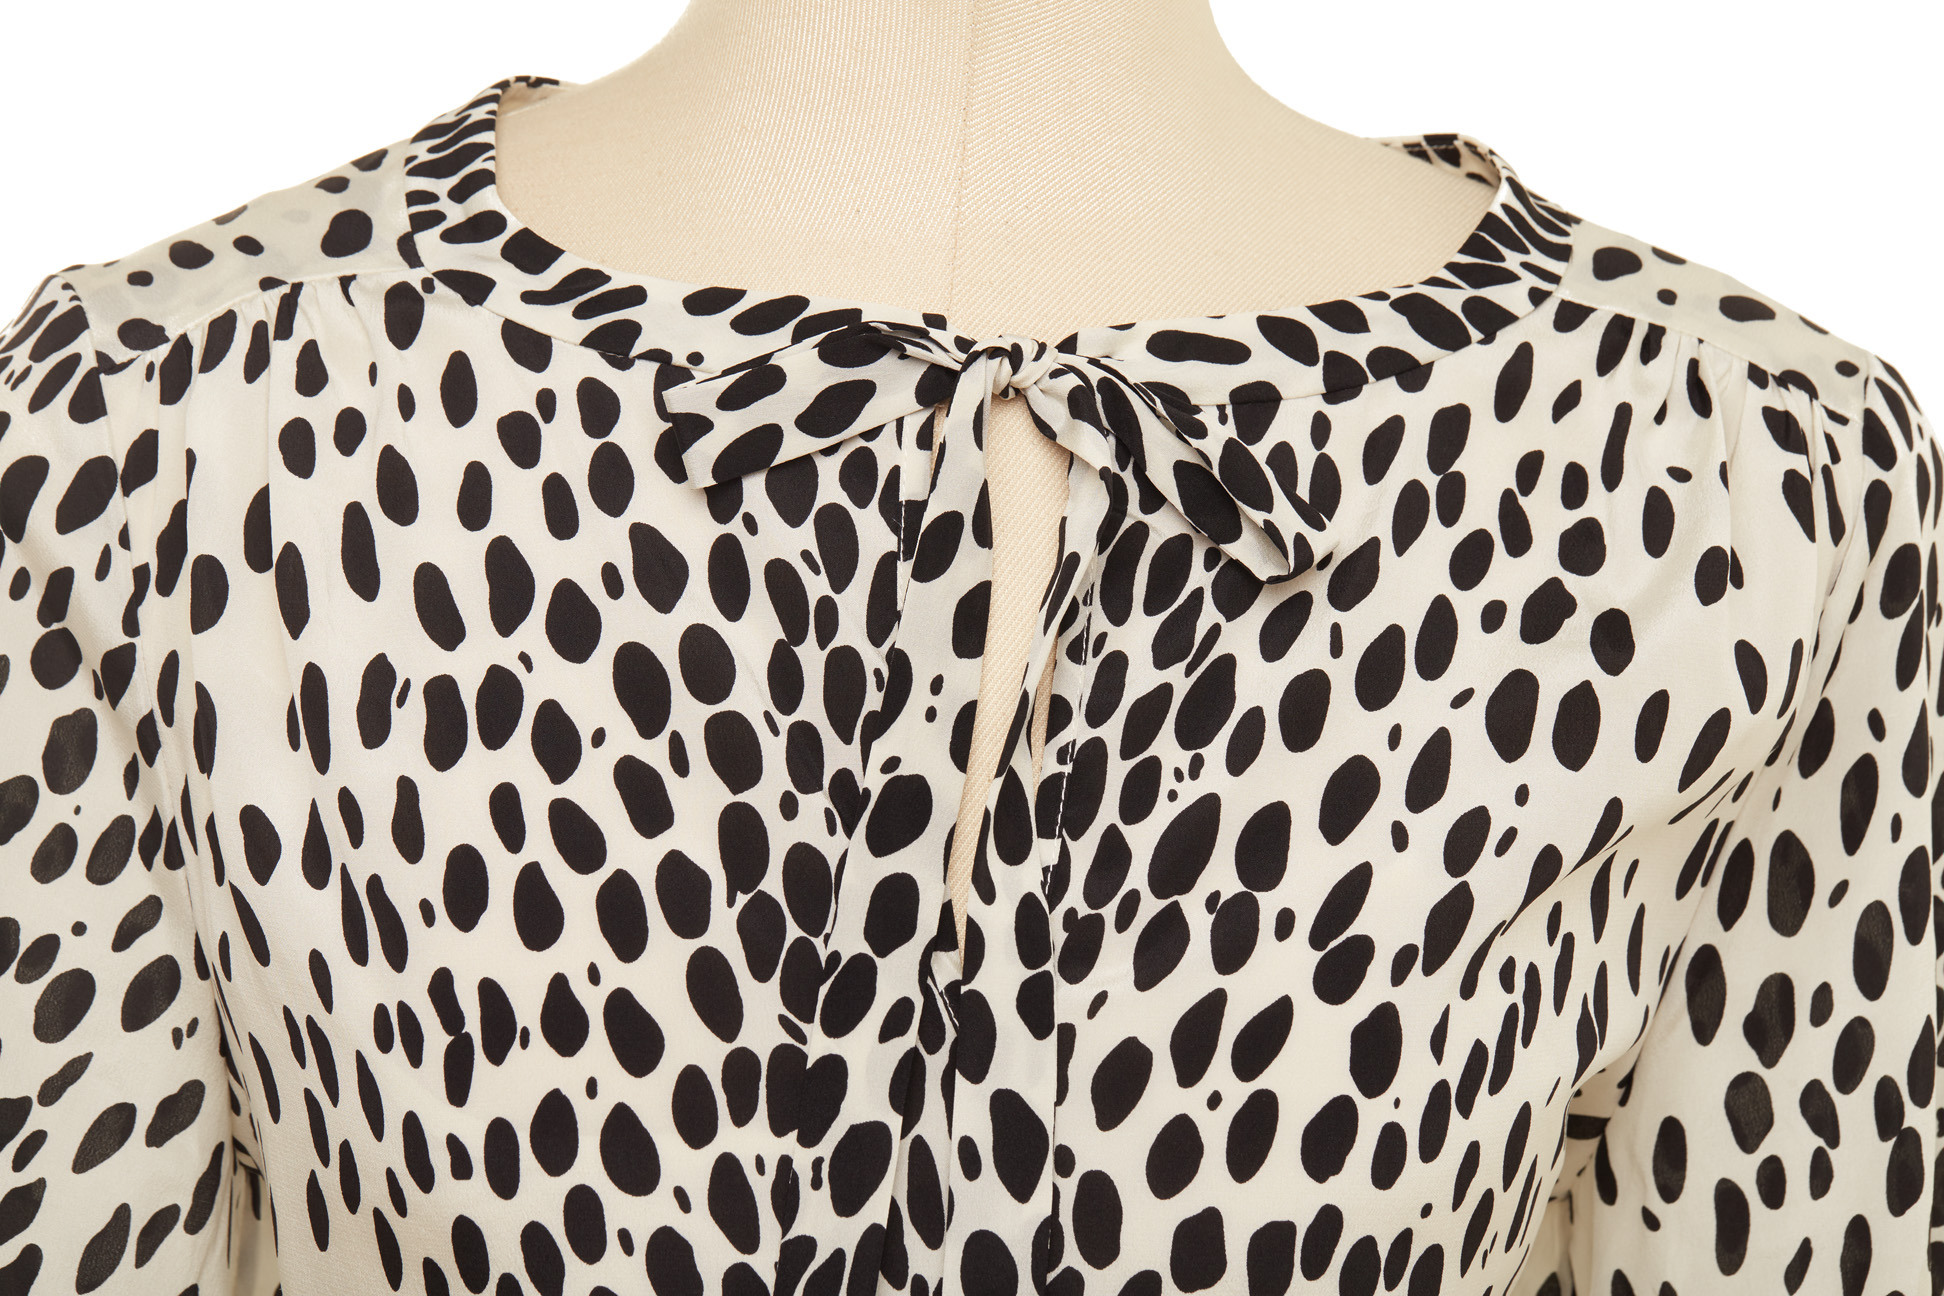 A DKNY BLACK AND WHITE SPOTTED DRESS - Image 2 of 2